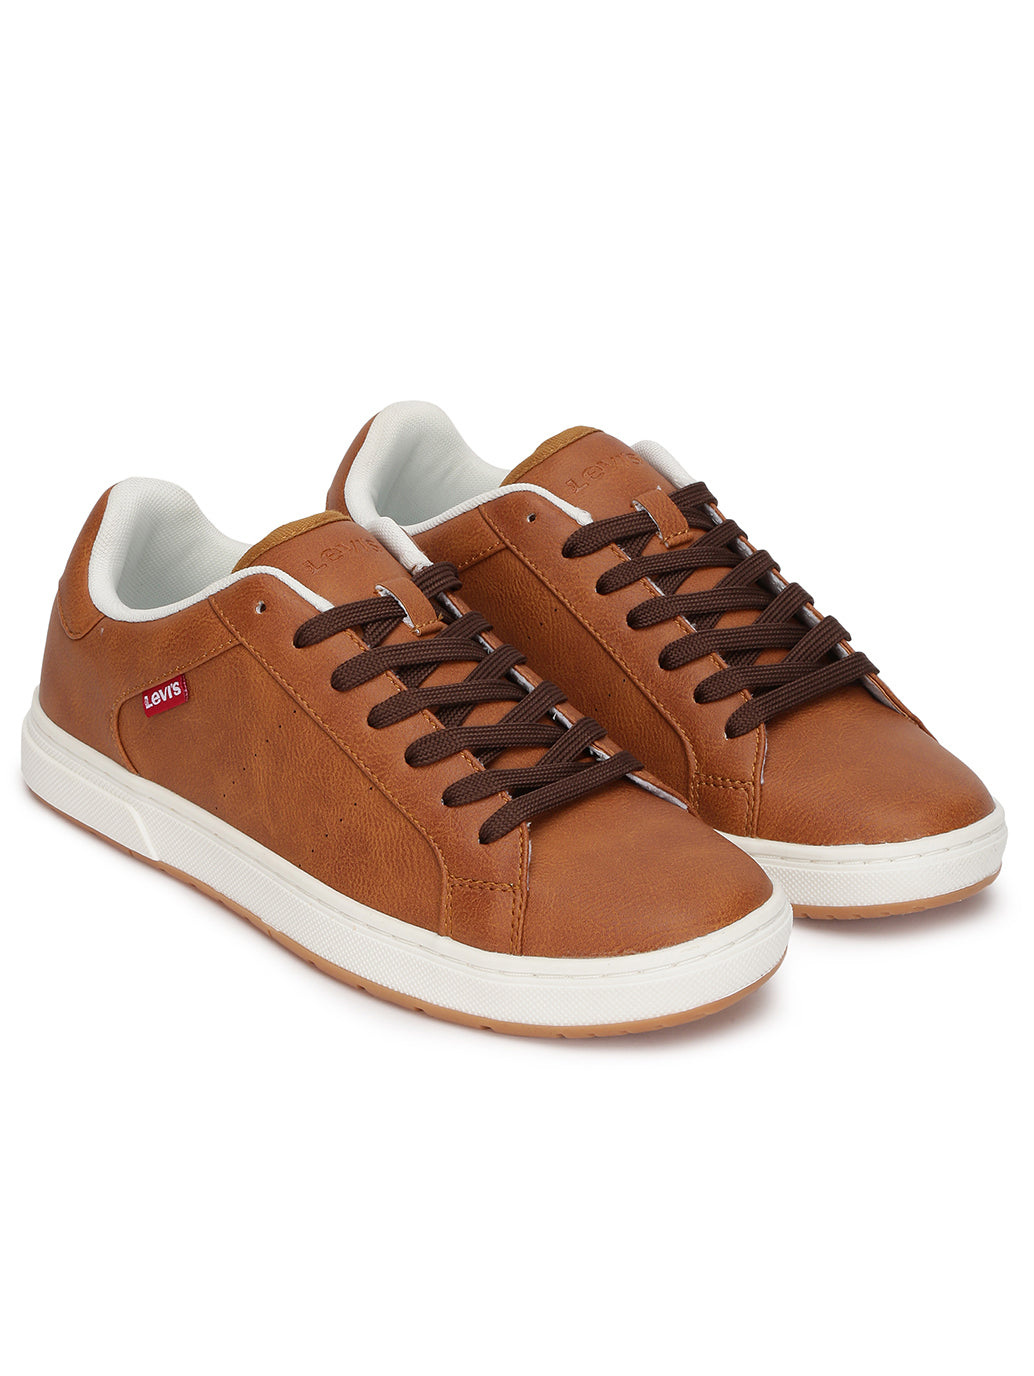 Men's Brown Faux Leather Sneakers